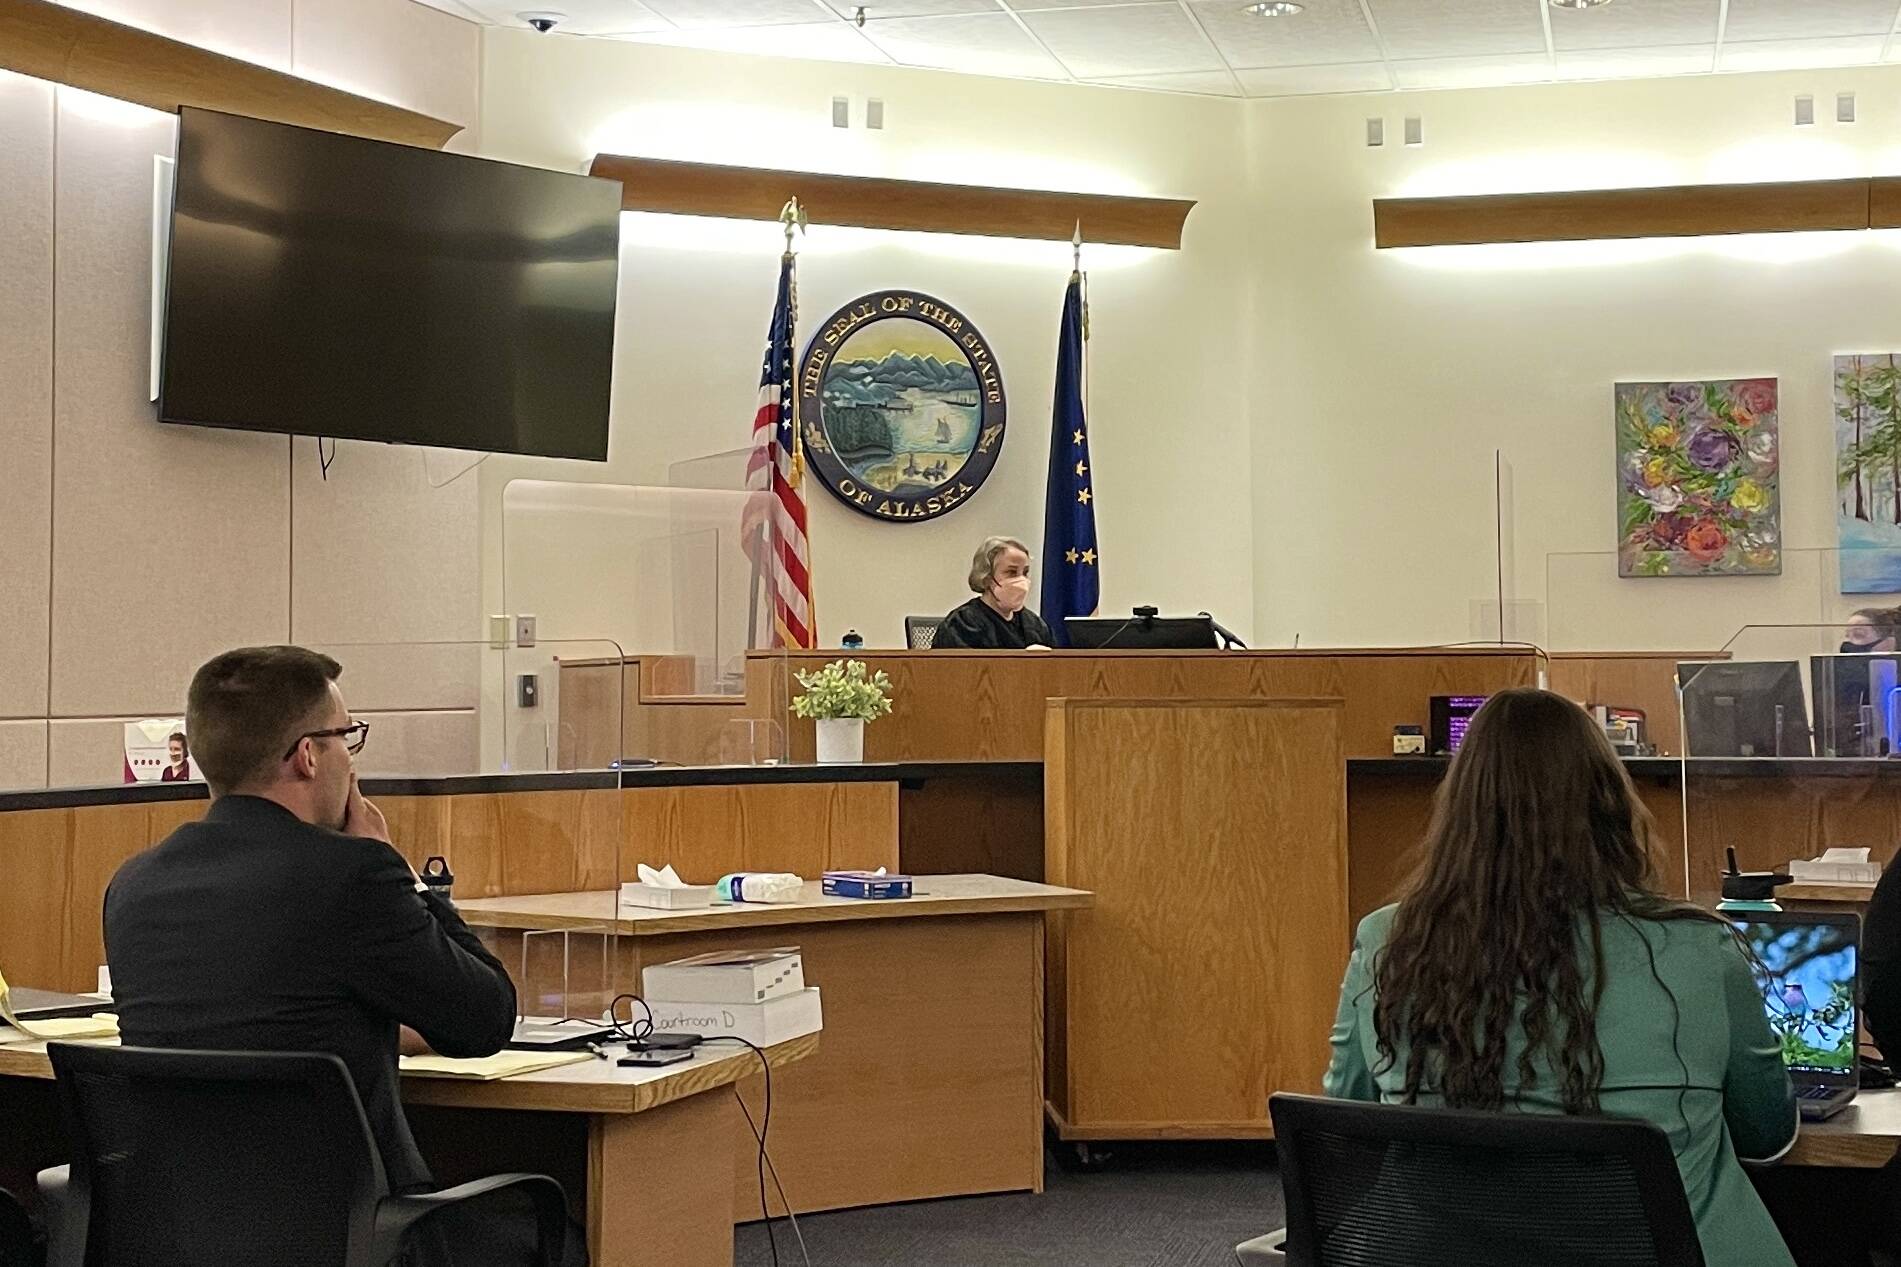 Public defender Nicolas Ambrose, left, and prosecutor Jessalyn Gillum, right, listen to Judge Amy Mead during the trial for a fatal 2019 stabbing on May 18, 2022. (Michael S. Lockett / Juneau Empire)